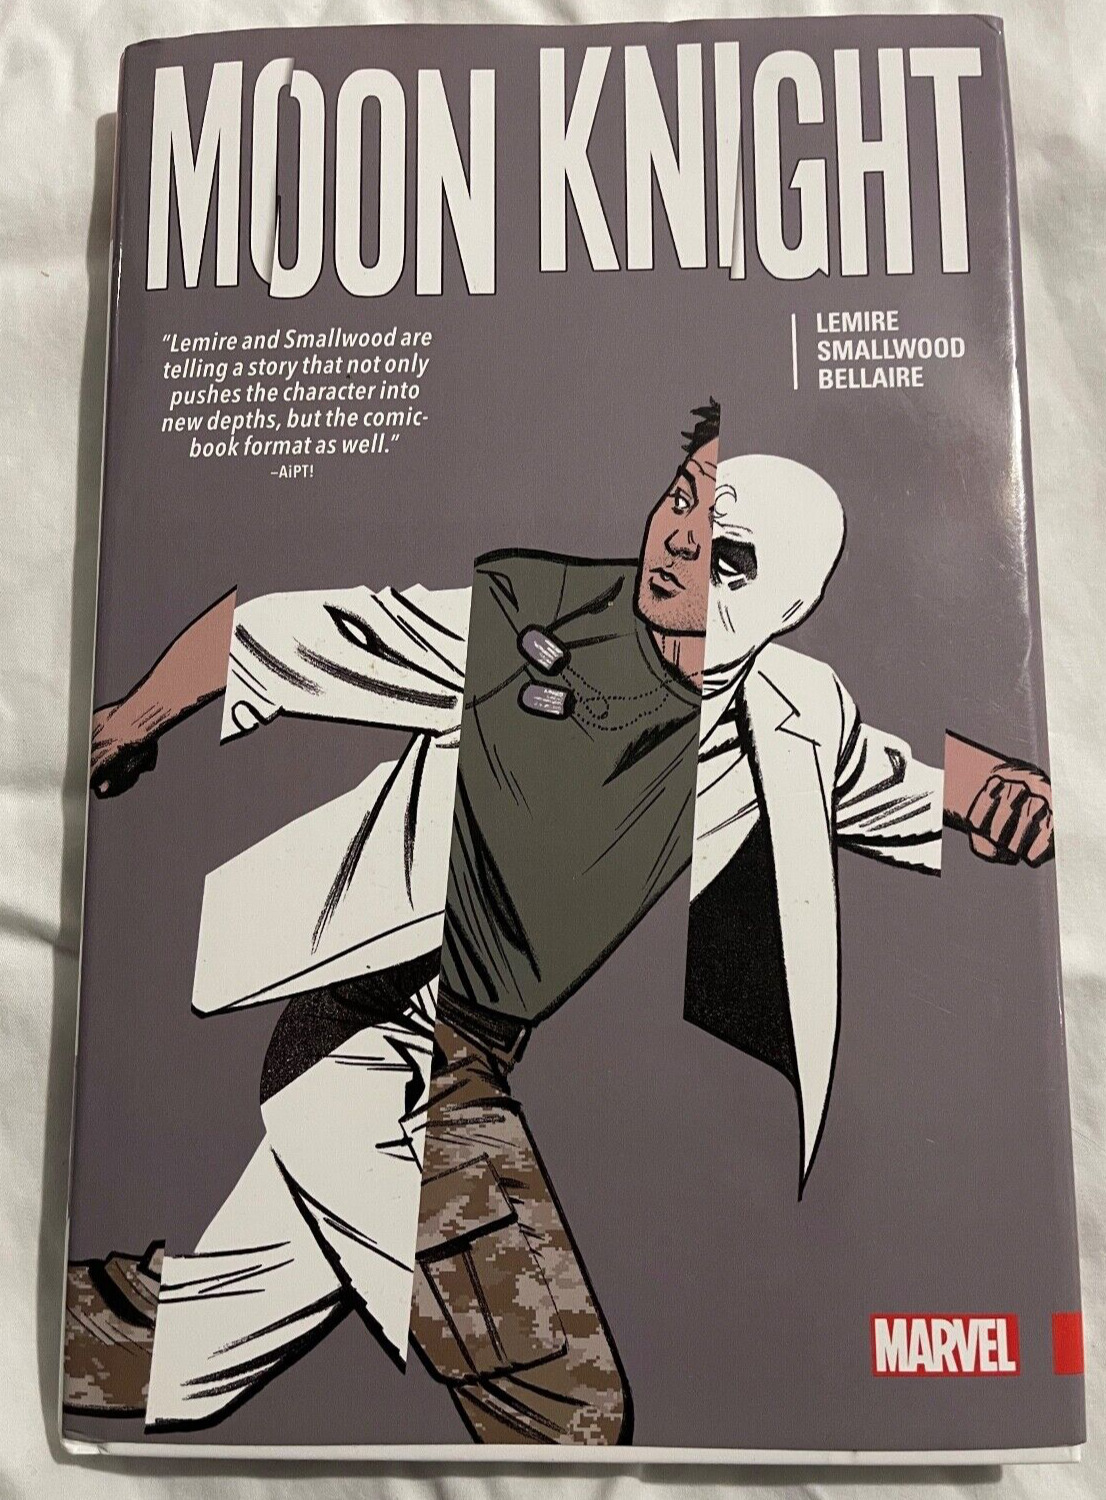 Moon Knight by Jeff Lemire and Greg Smallwood - HARDCOVER - VERY GOOD